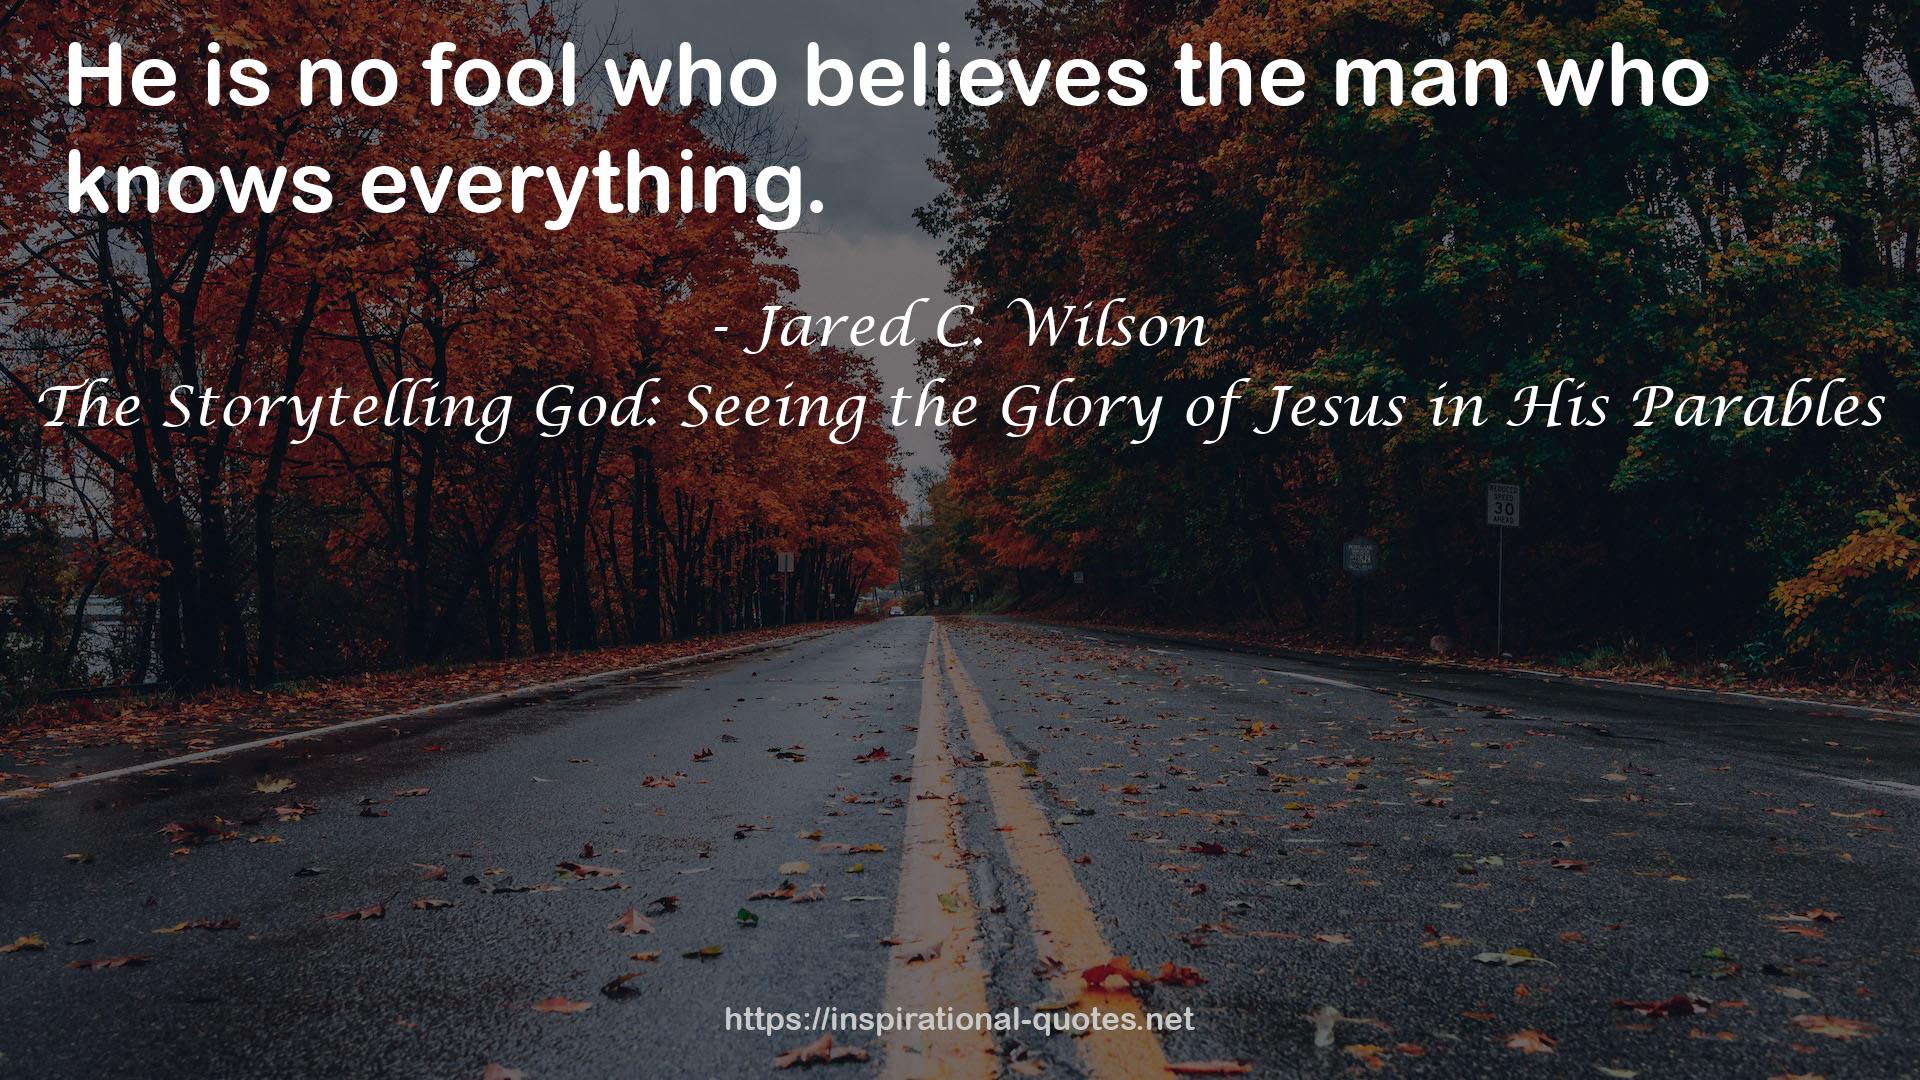 The Storytelling God: Seeing the Glory of Jesus in His Parables QUOTES